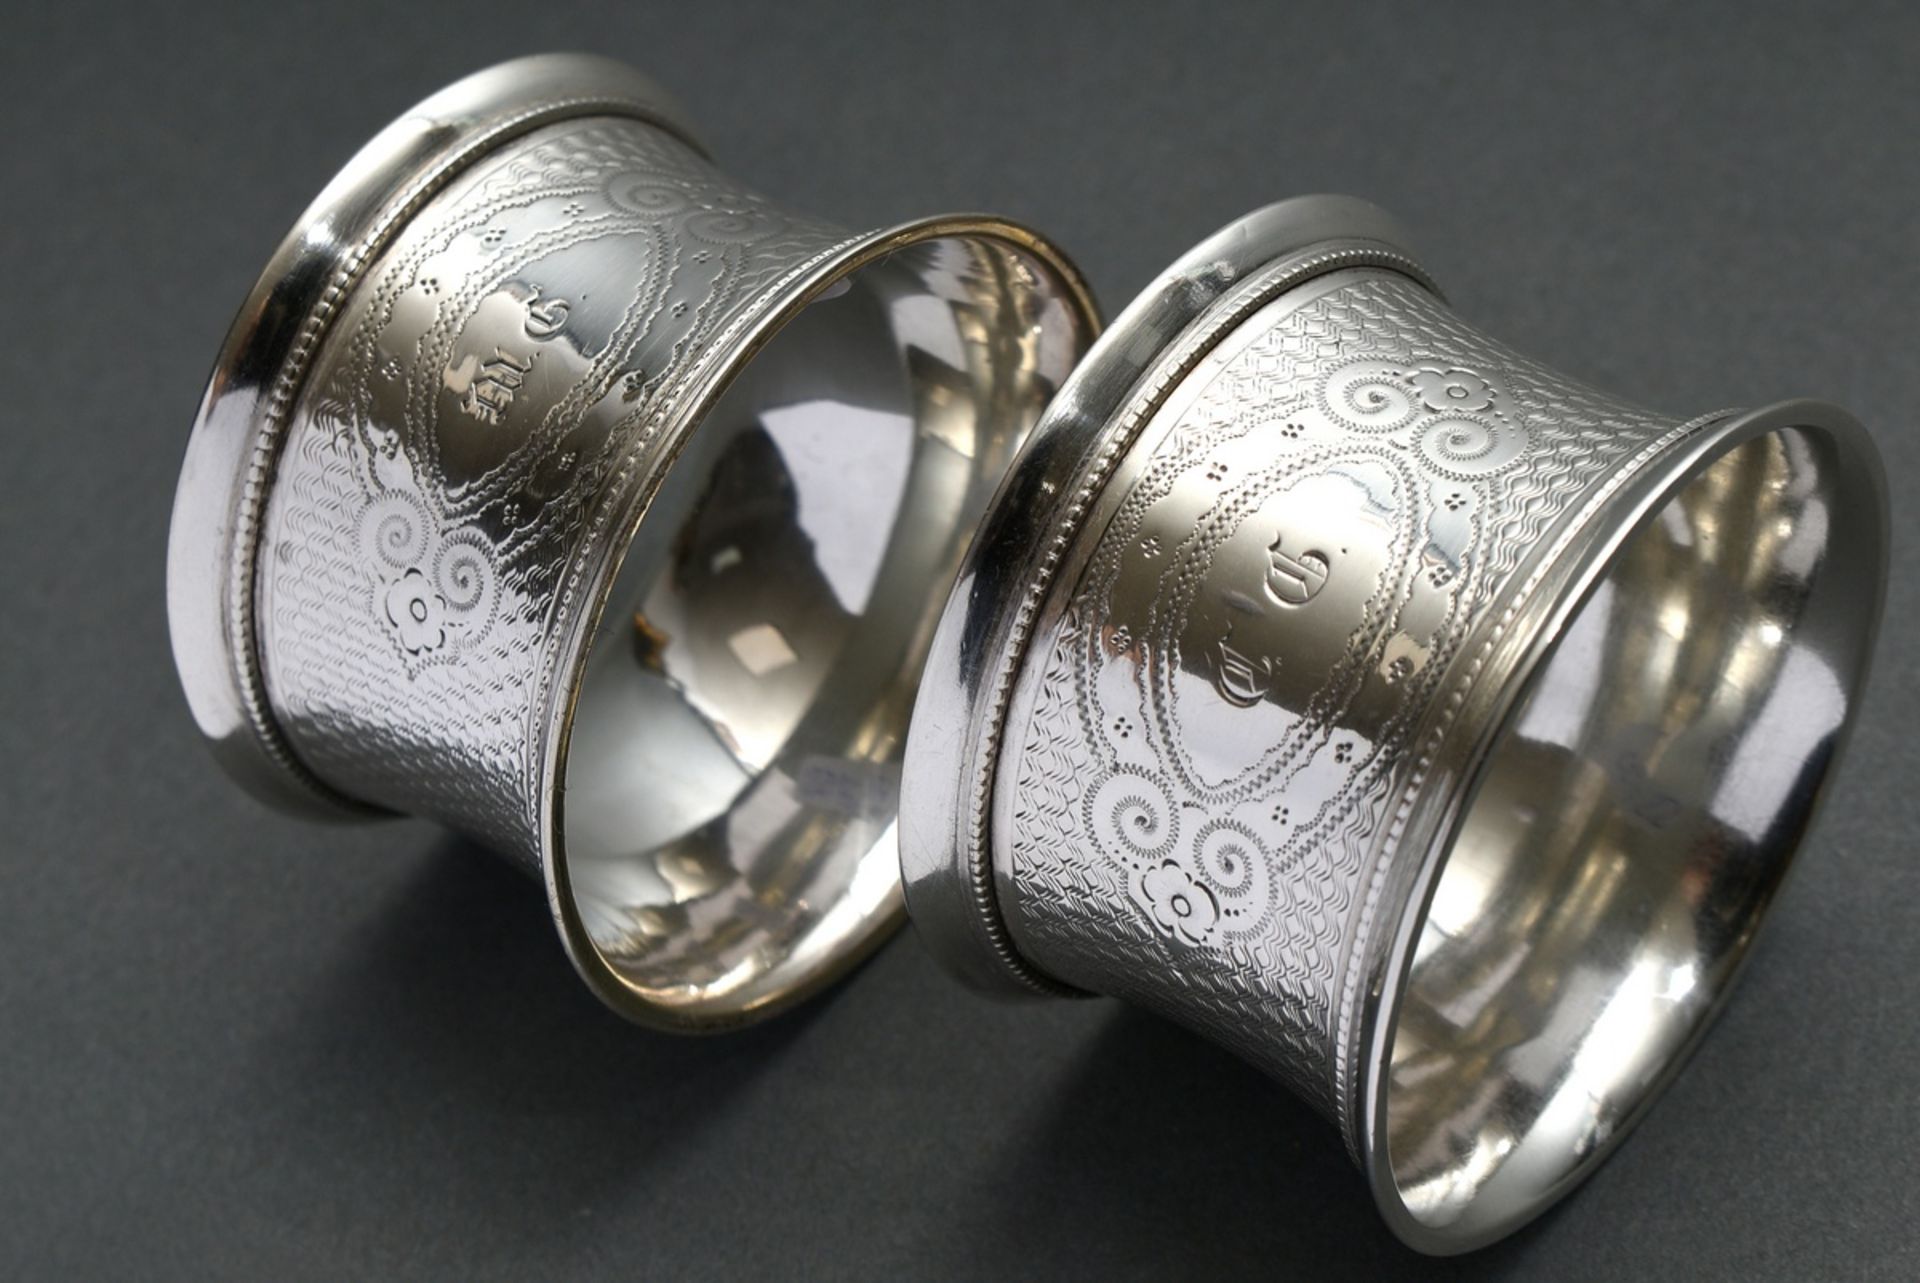 2 Guilloché napkin rings with Fraktur script monograms ‘CG/MG’, German, late 19th century, silver 1 - Image 4 of 4